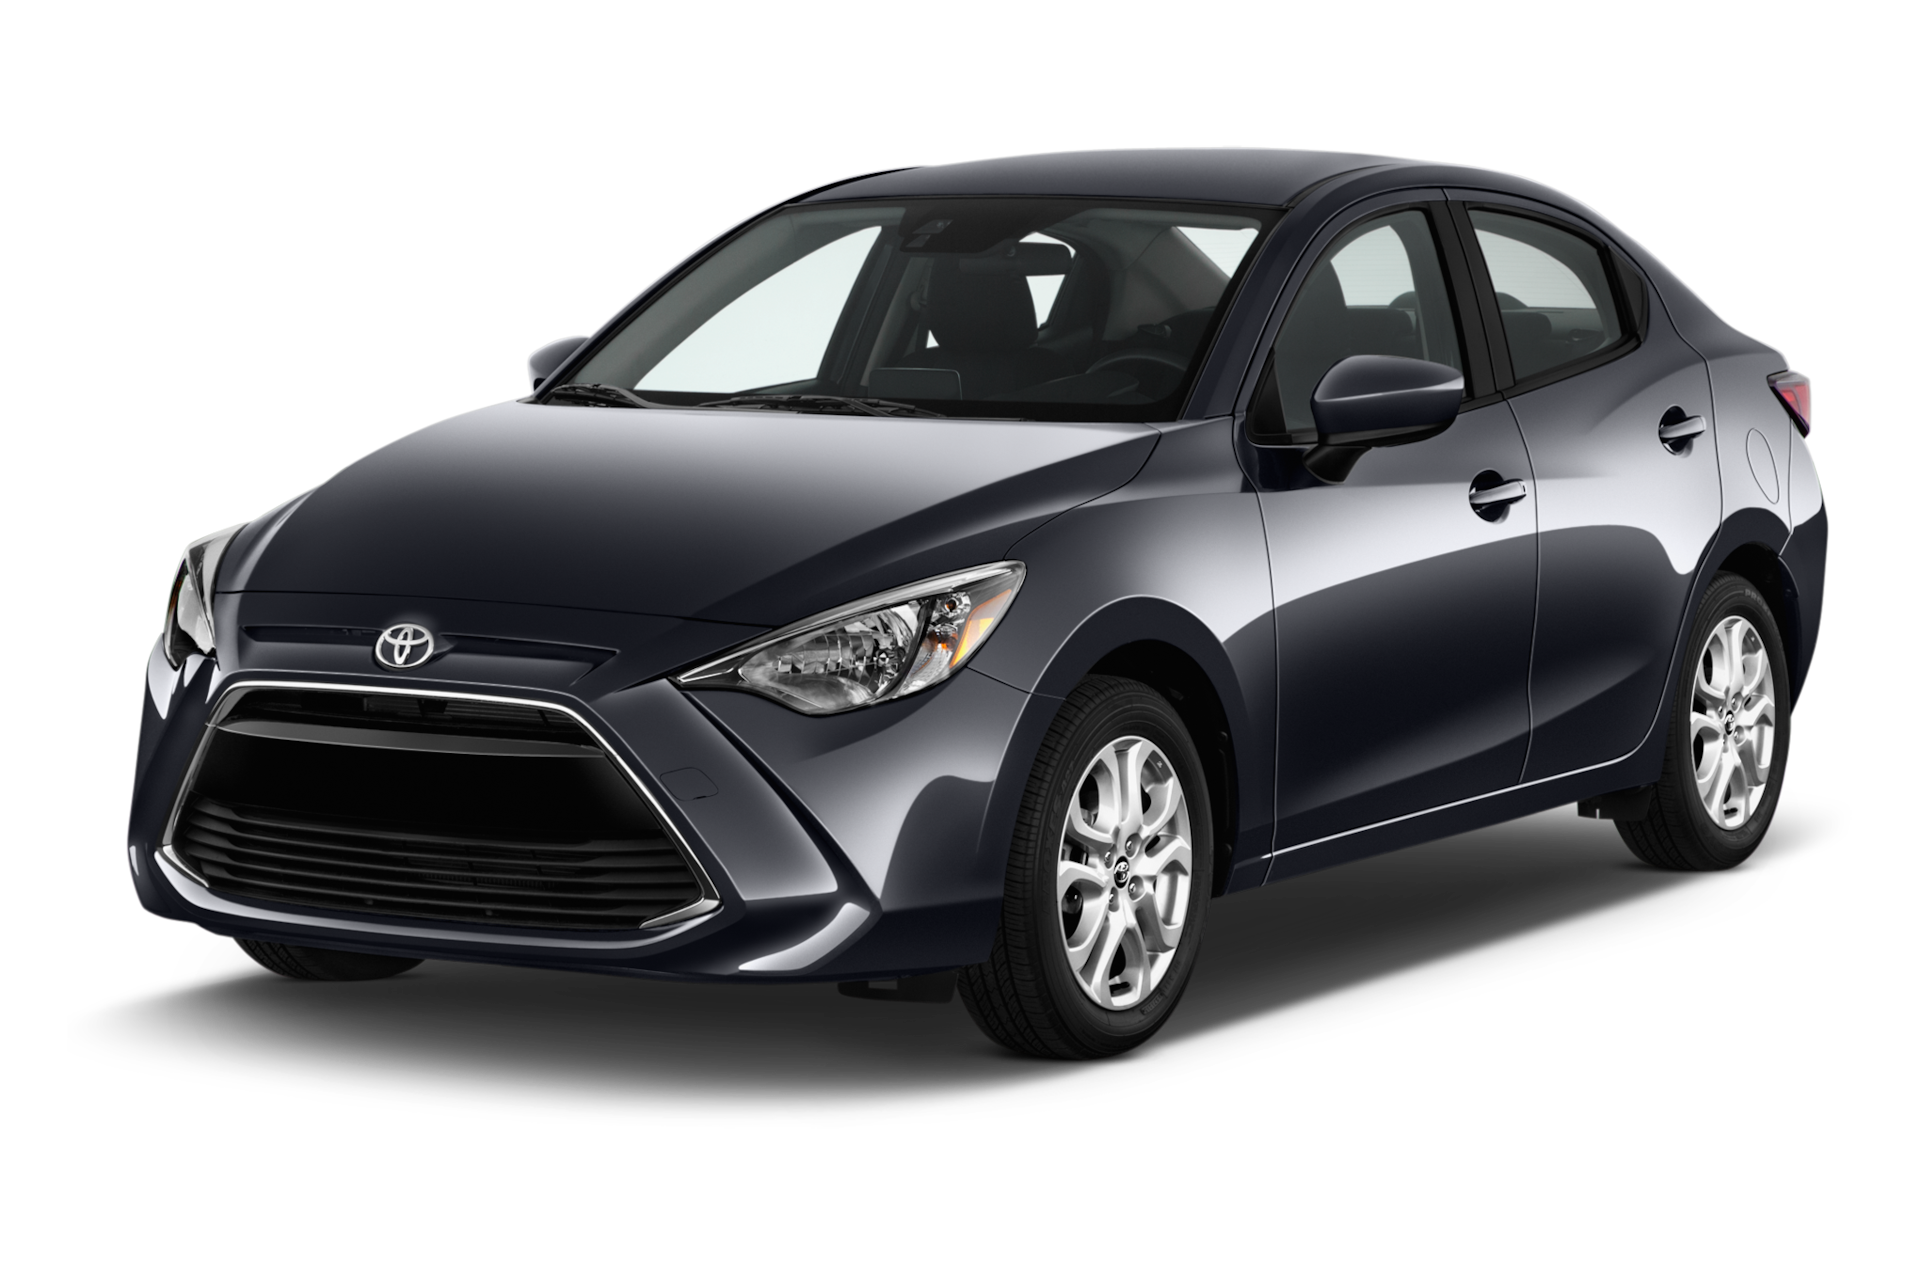 2017 Toyota Yaris iA Prices, Reviews, and Photos - MotorTrend